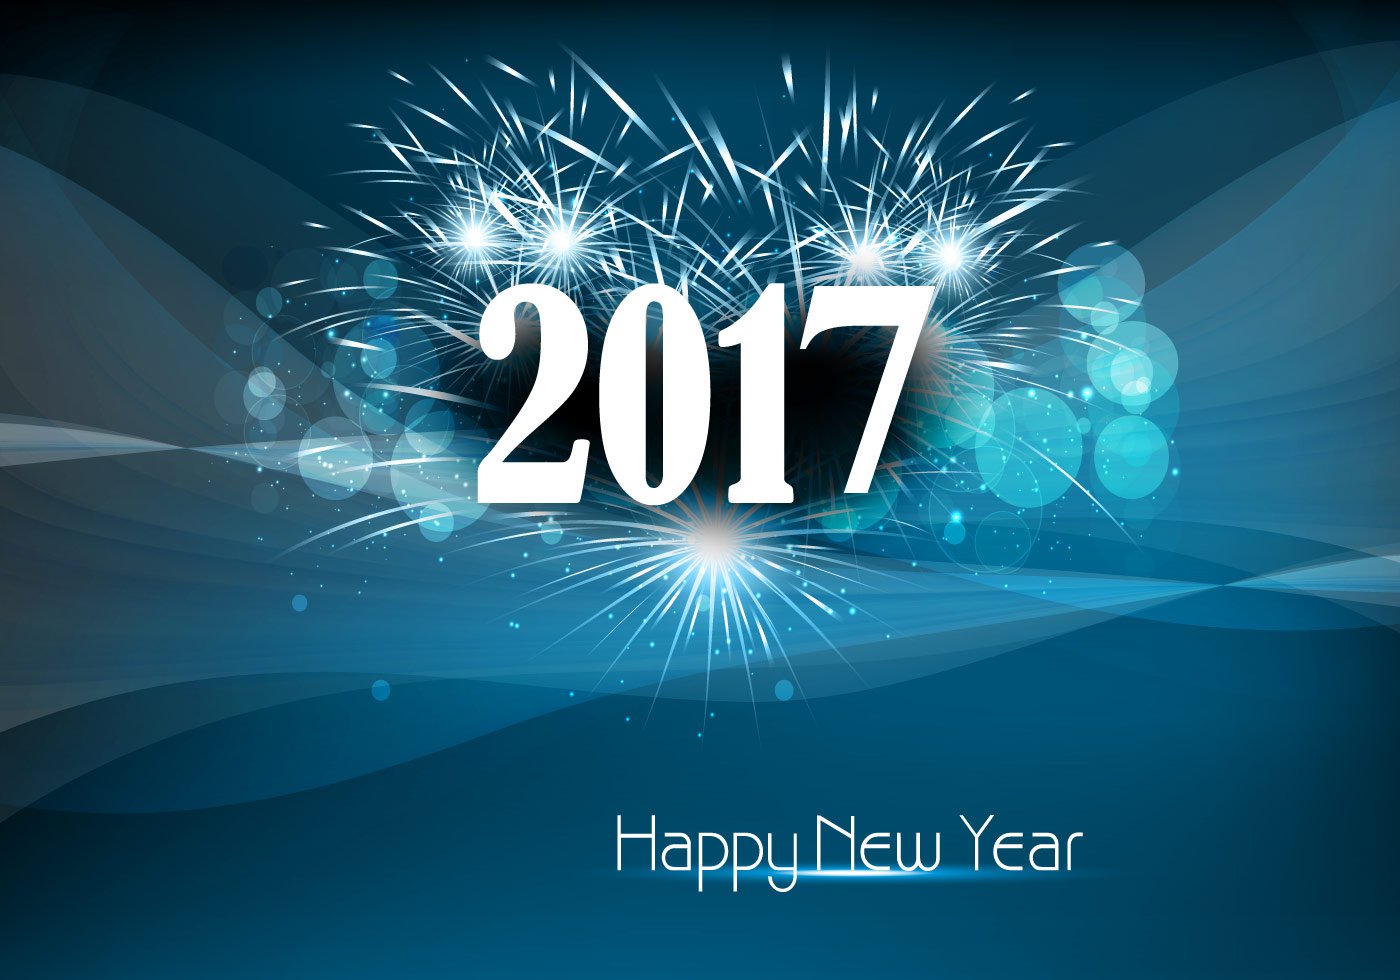 Happy New Year Live Wallpaper Download - Happy New Year Png Background - HD Wallpaper 